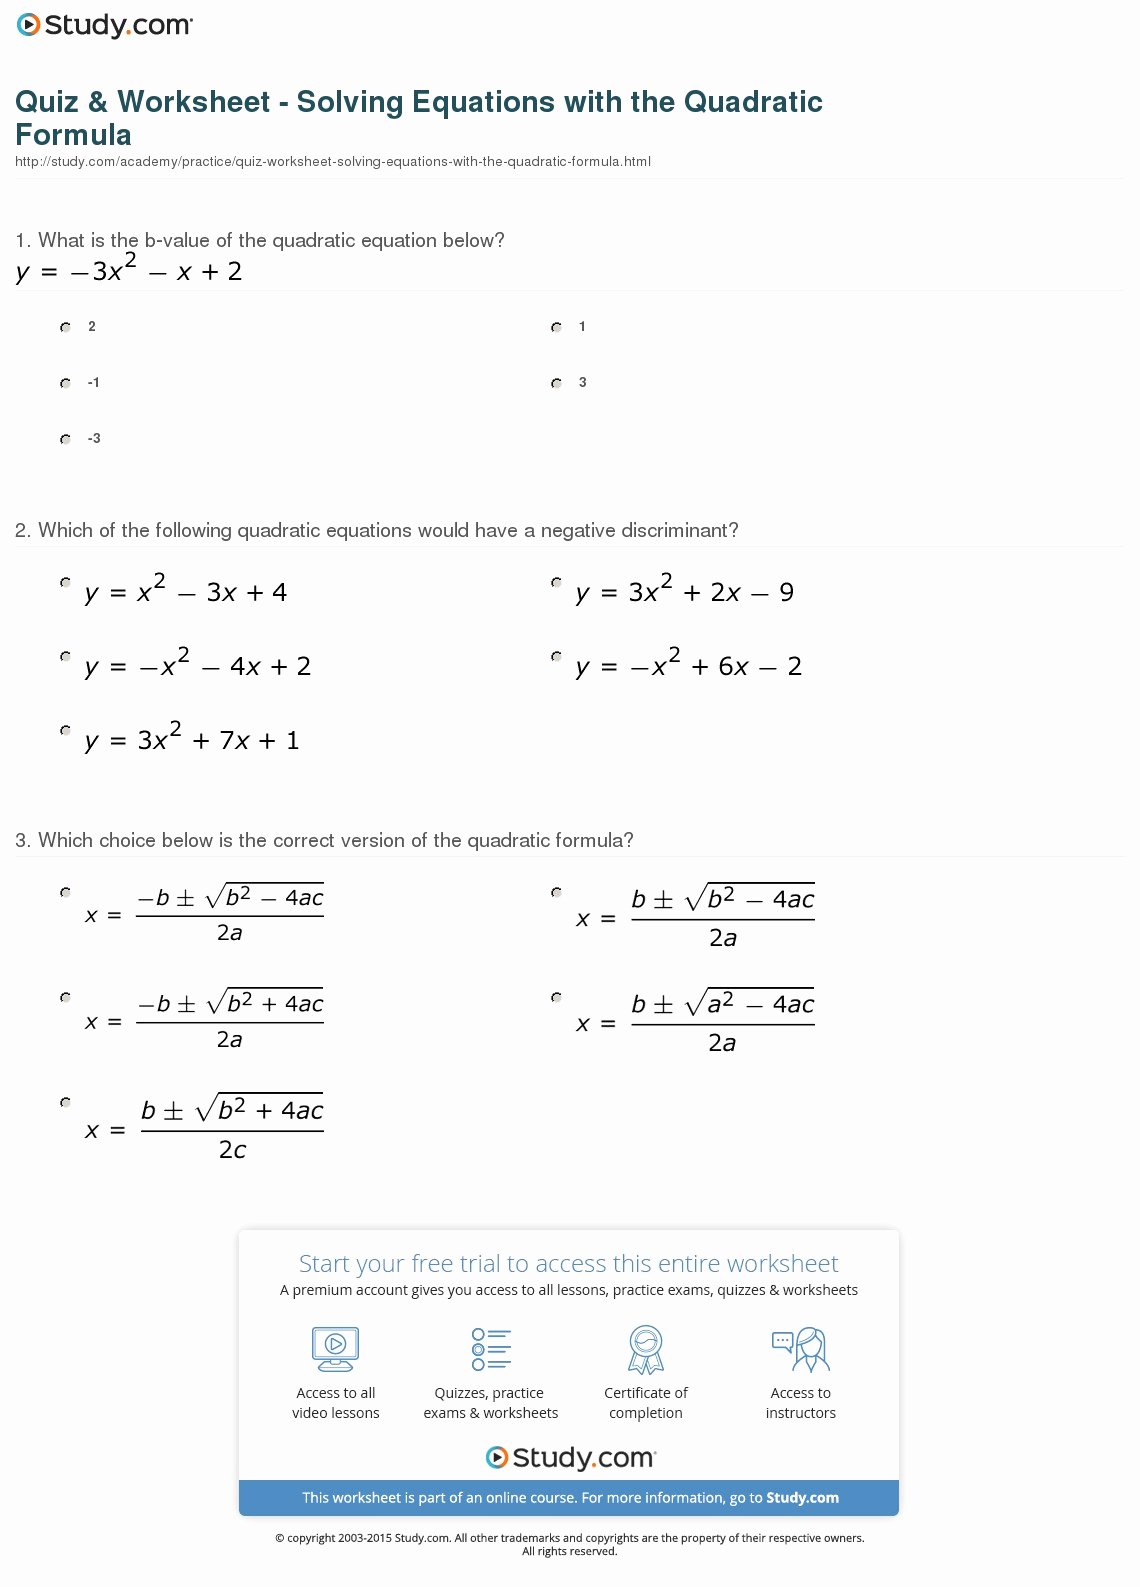 Characteristics Of Functions Worksheet Best Of Piecewise Functions Worksheet with Answers Piecewise